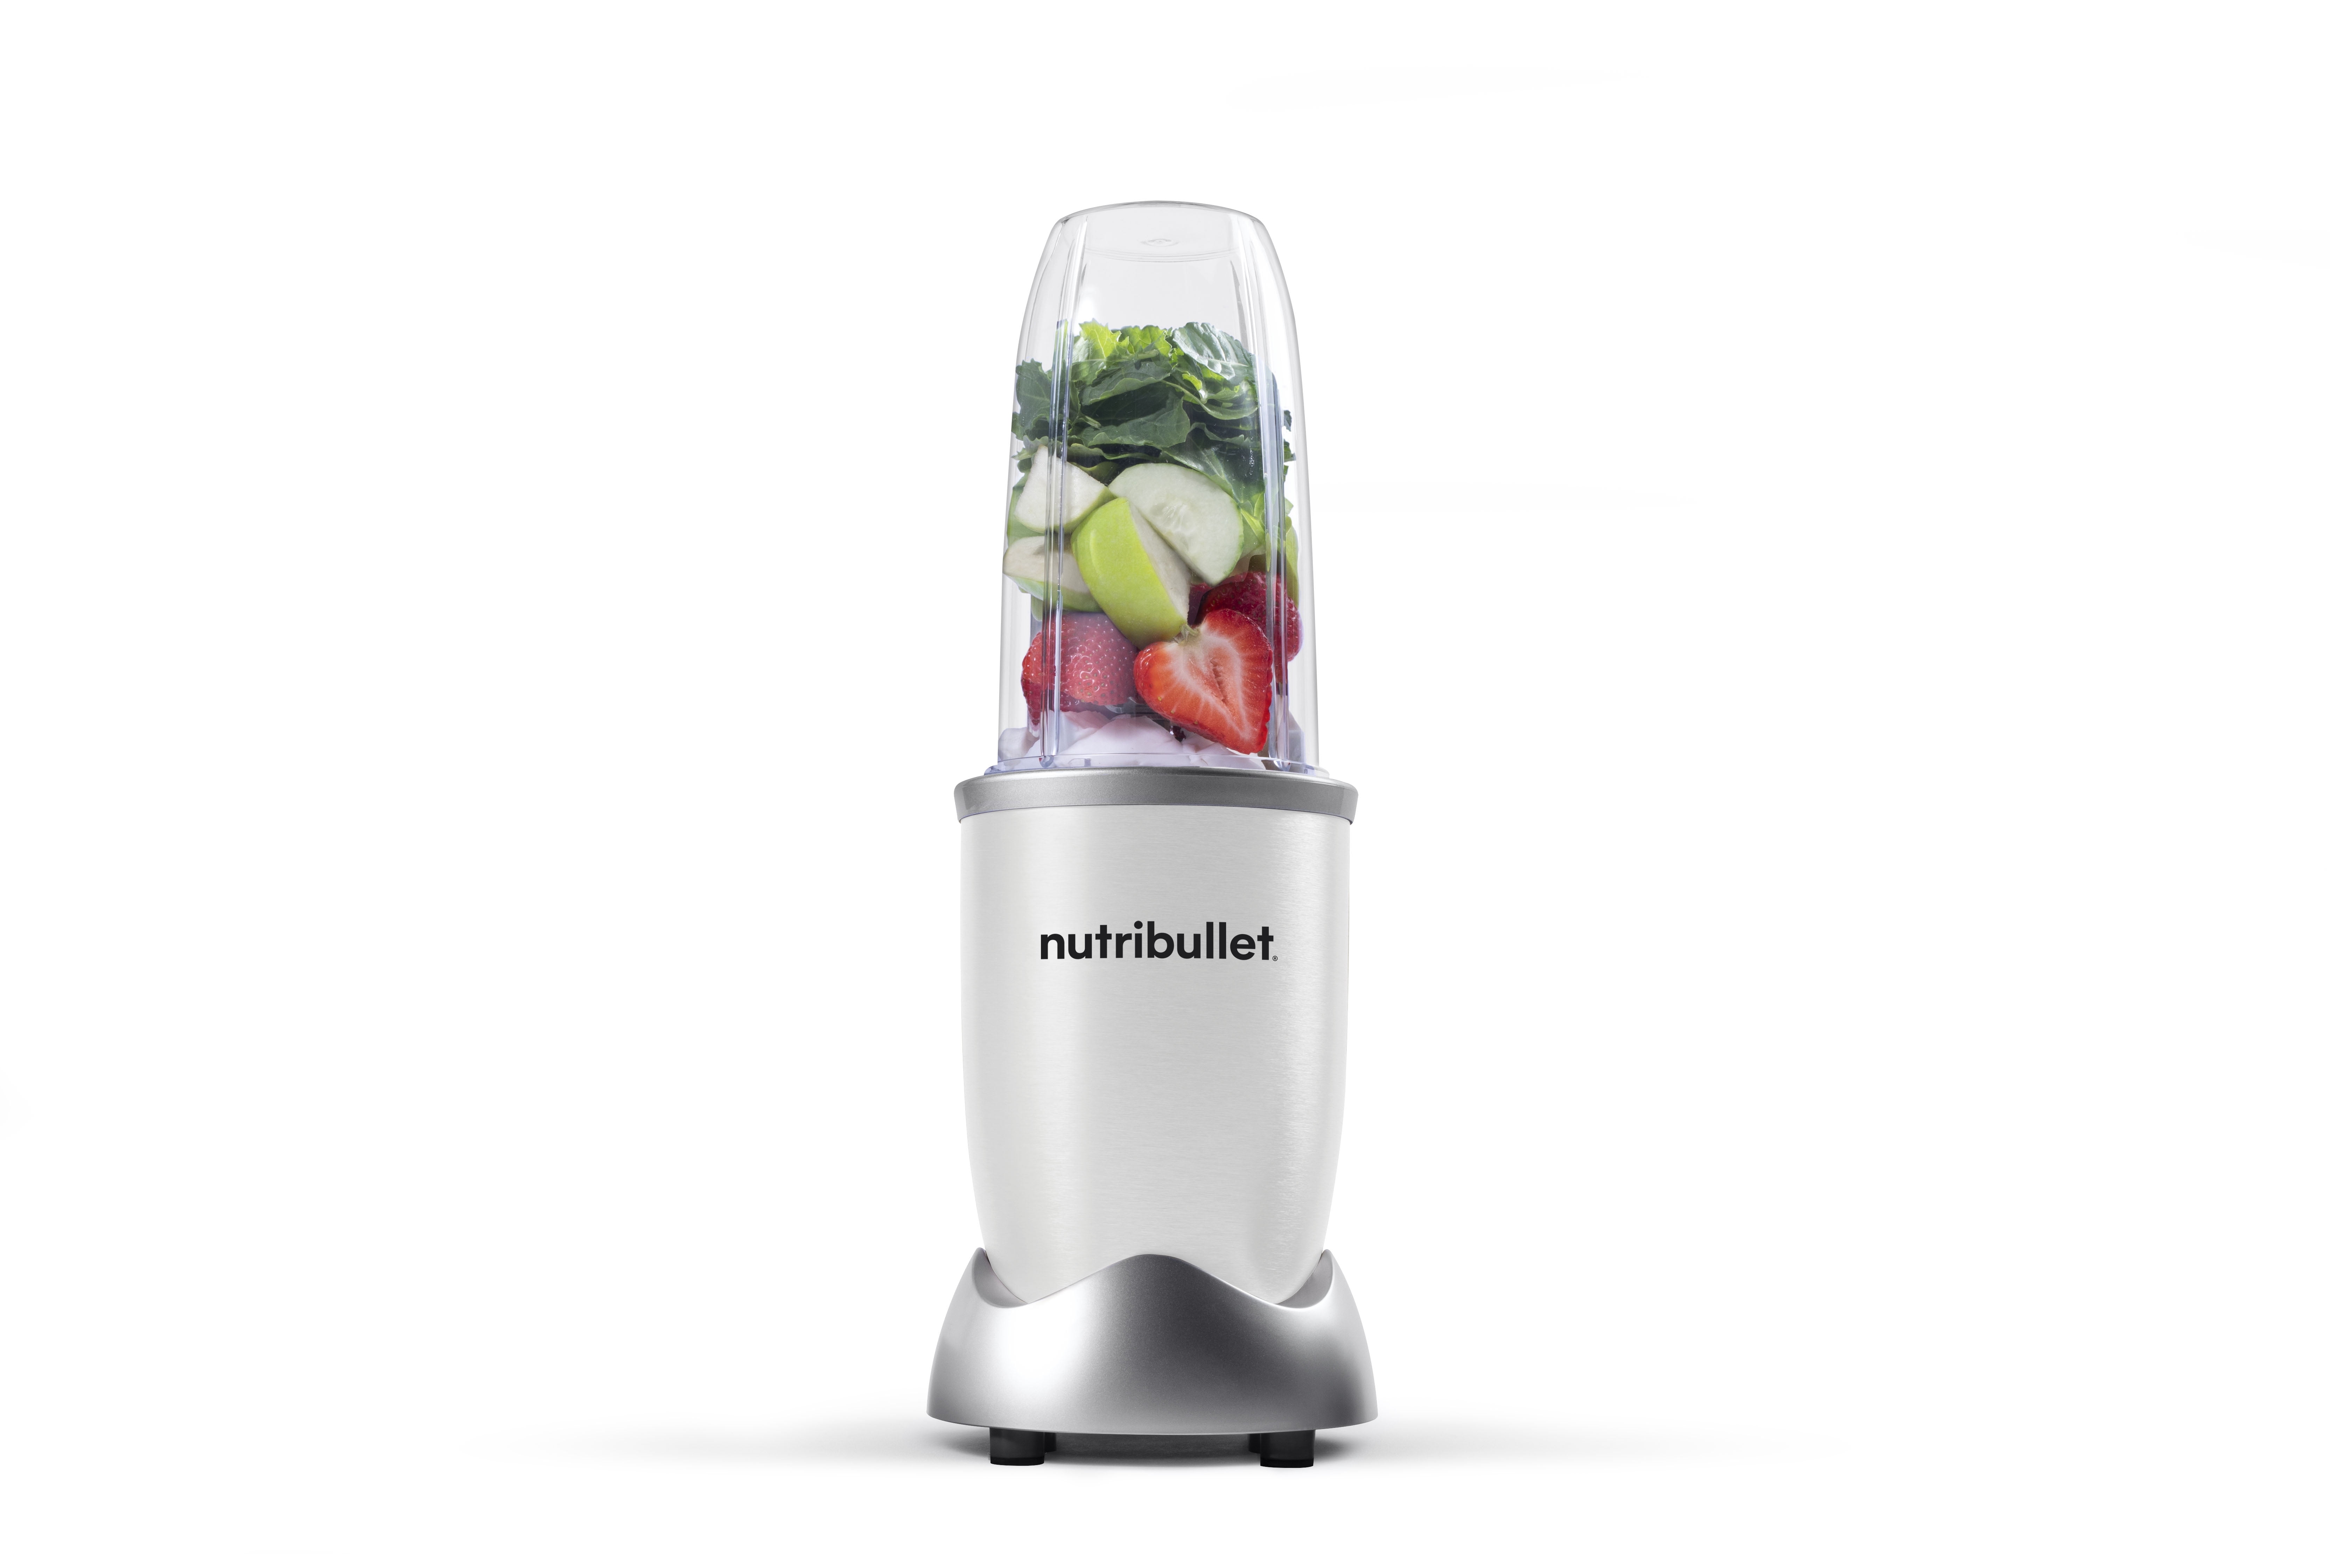 nutribullet - Red, set, go! 🍓Meet the nutribullet Pro 900 in strawberry,  one of our new matte colors. With 900 watts of power, this compact  powerhouse can turn anything from strawberries to